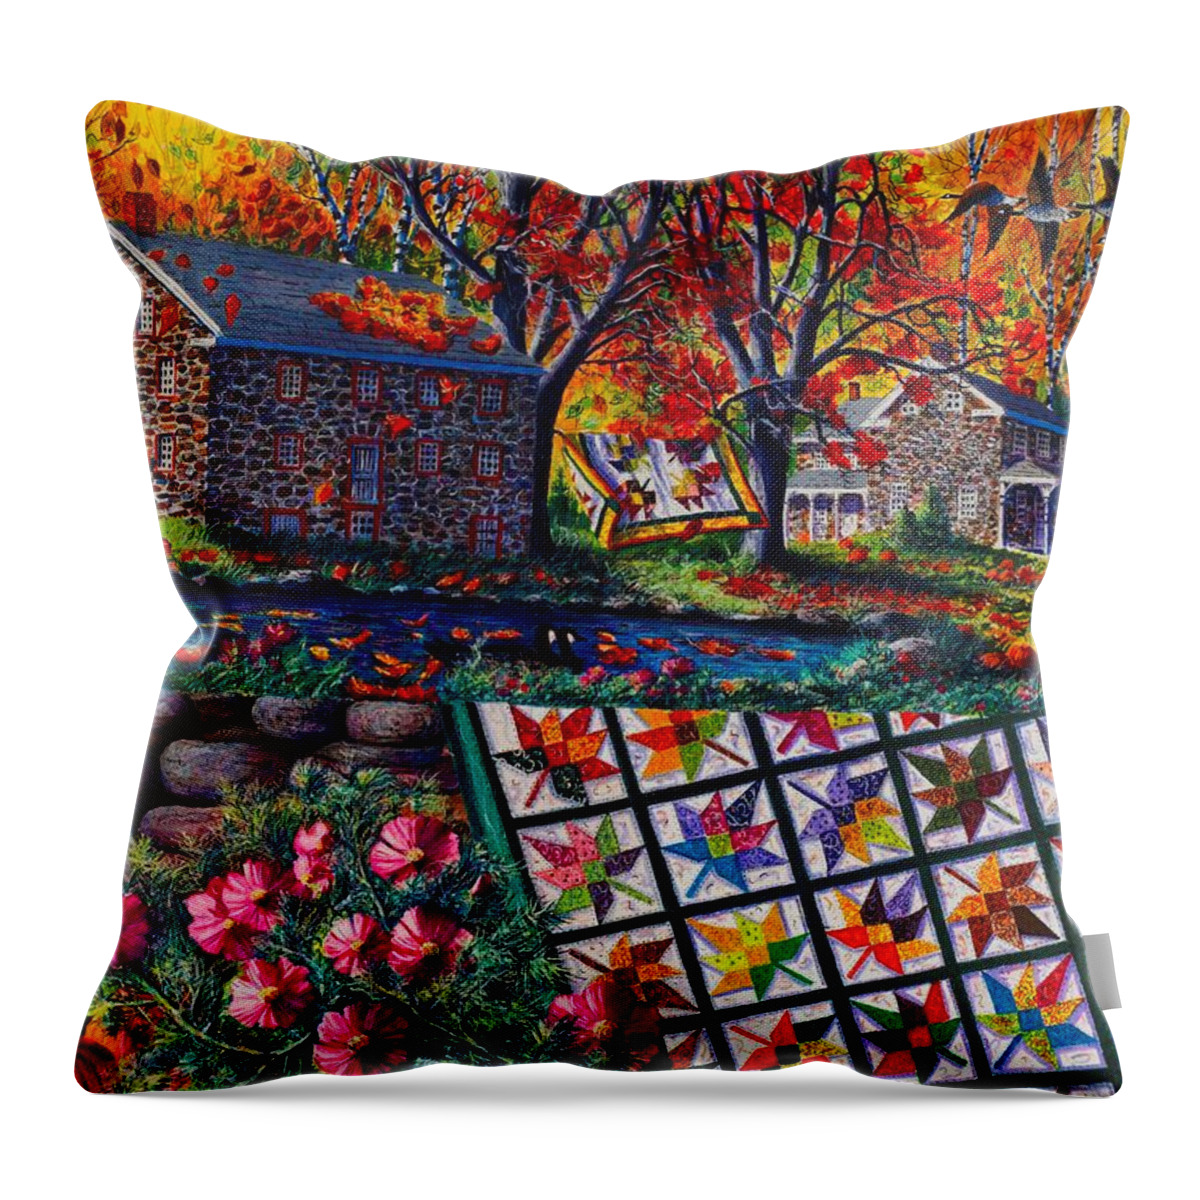 Landscape Of Stone Mill Autumn Crossing Throw Pillow featuring the painting Stone Mill Autumn Crossing by Diane Phalen